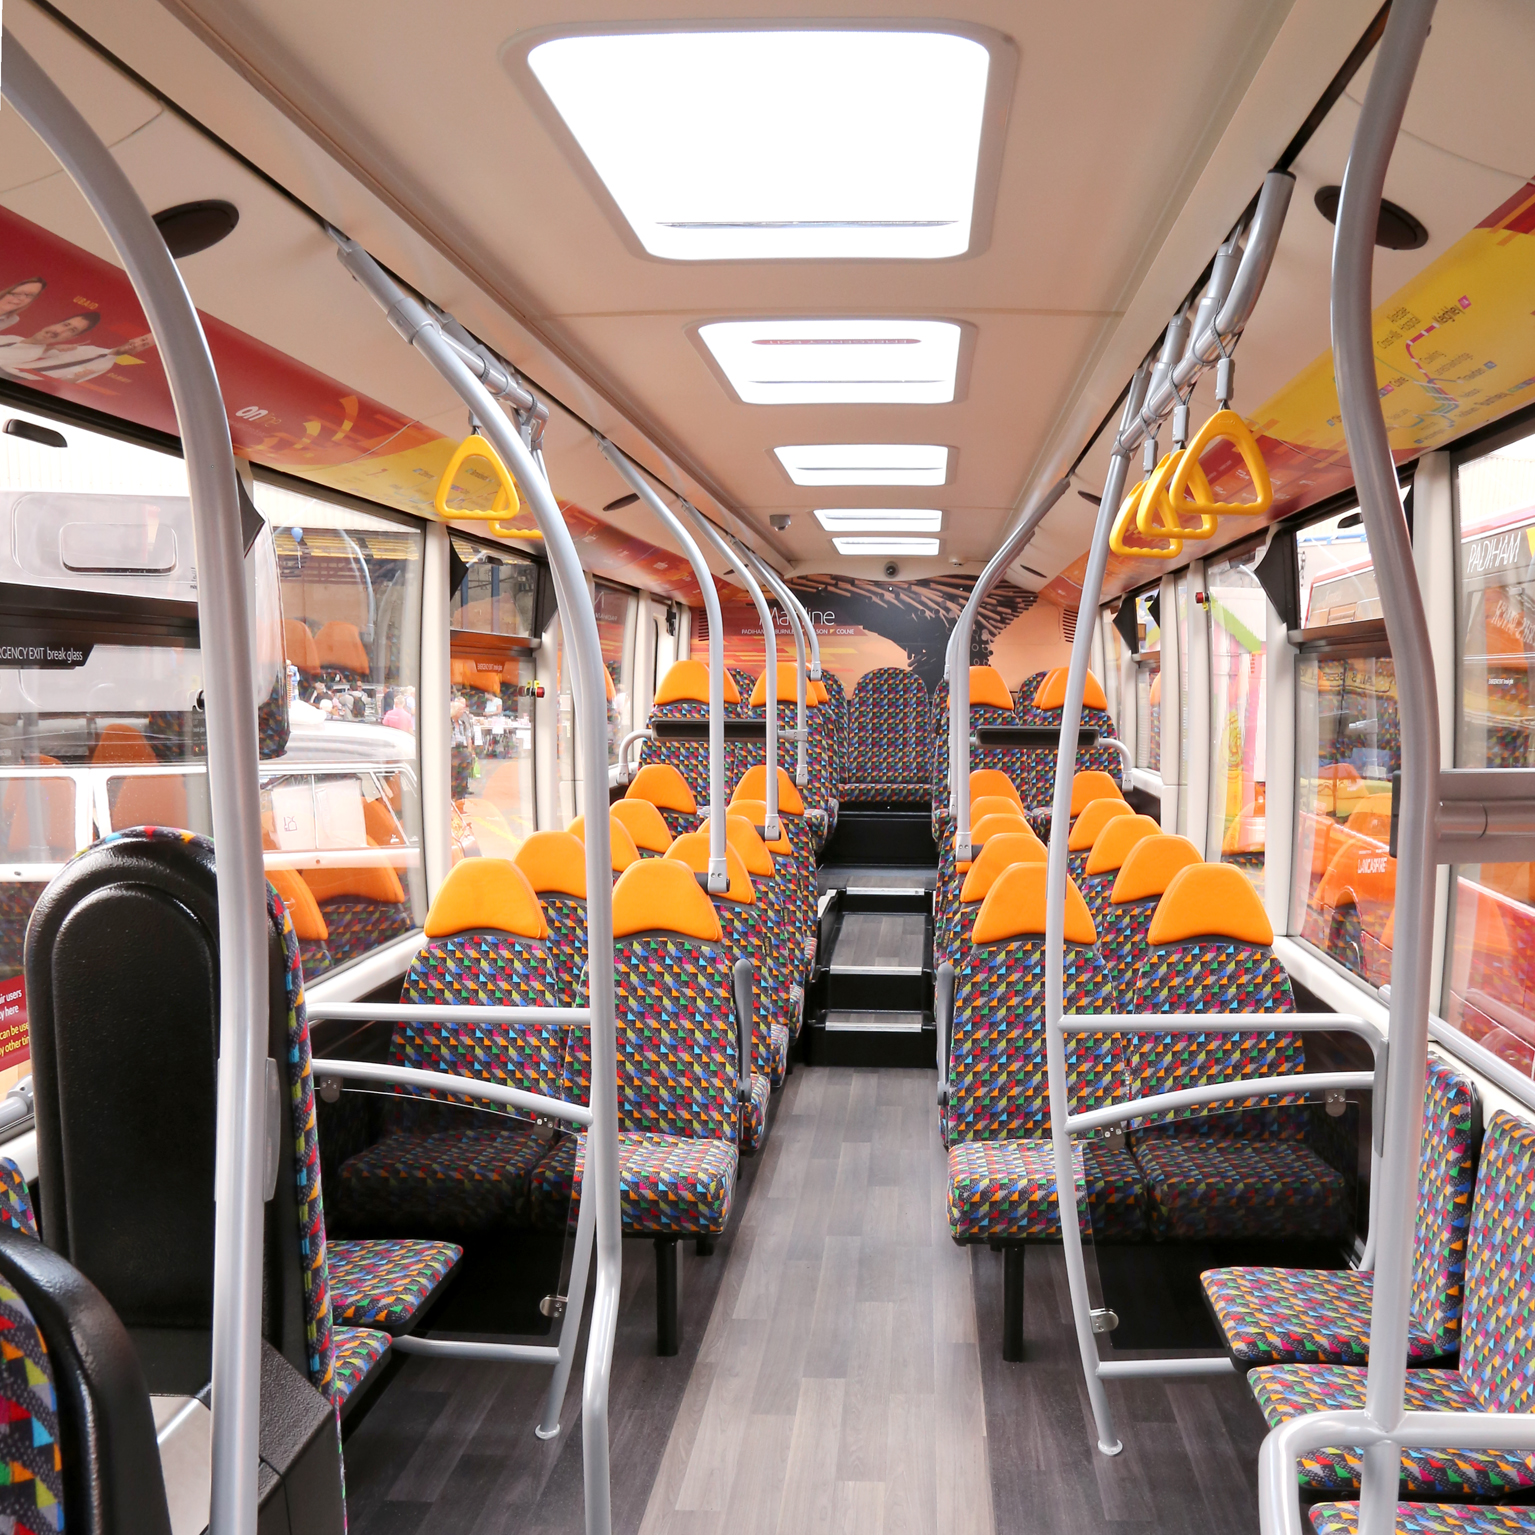 All forward facing seats to be used in Wales